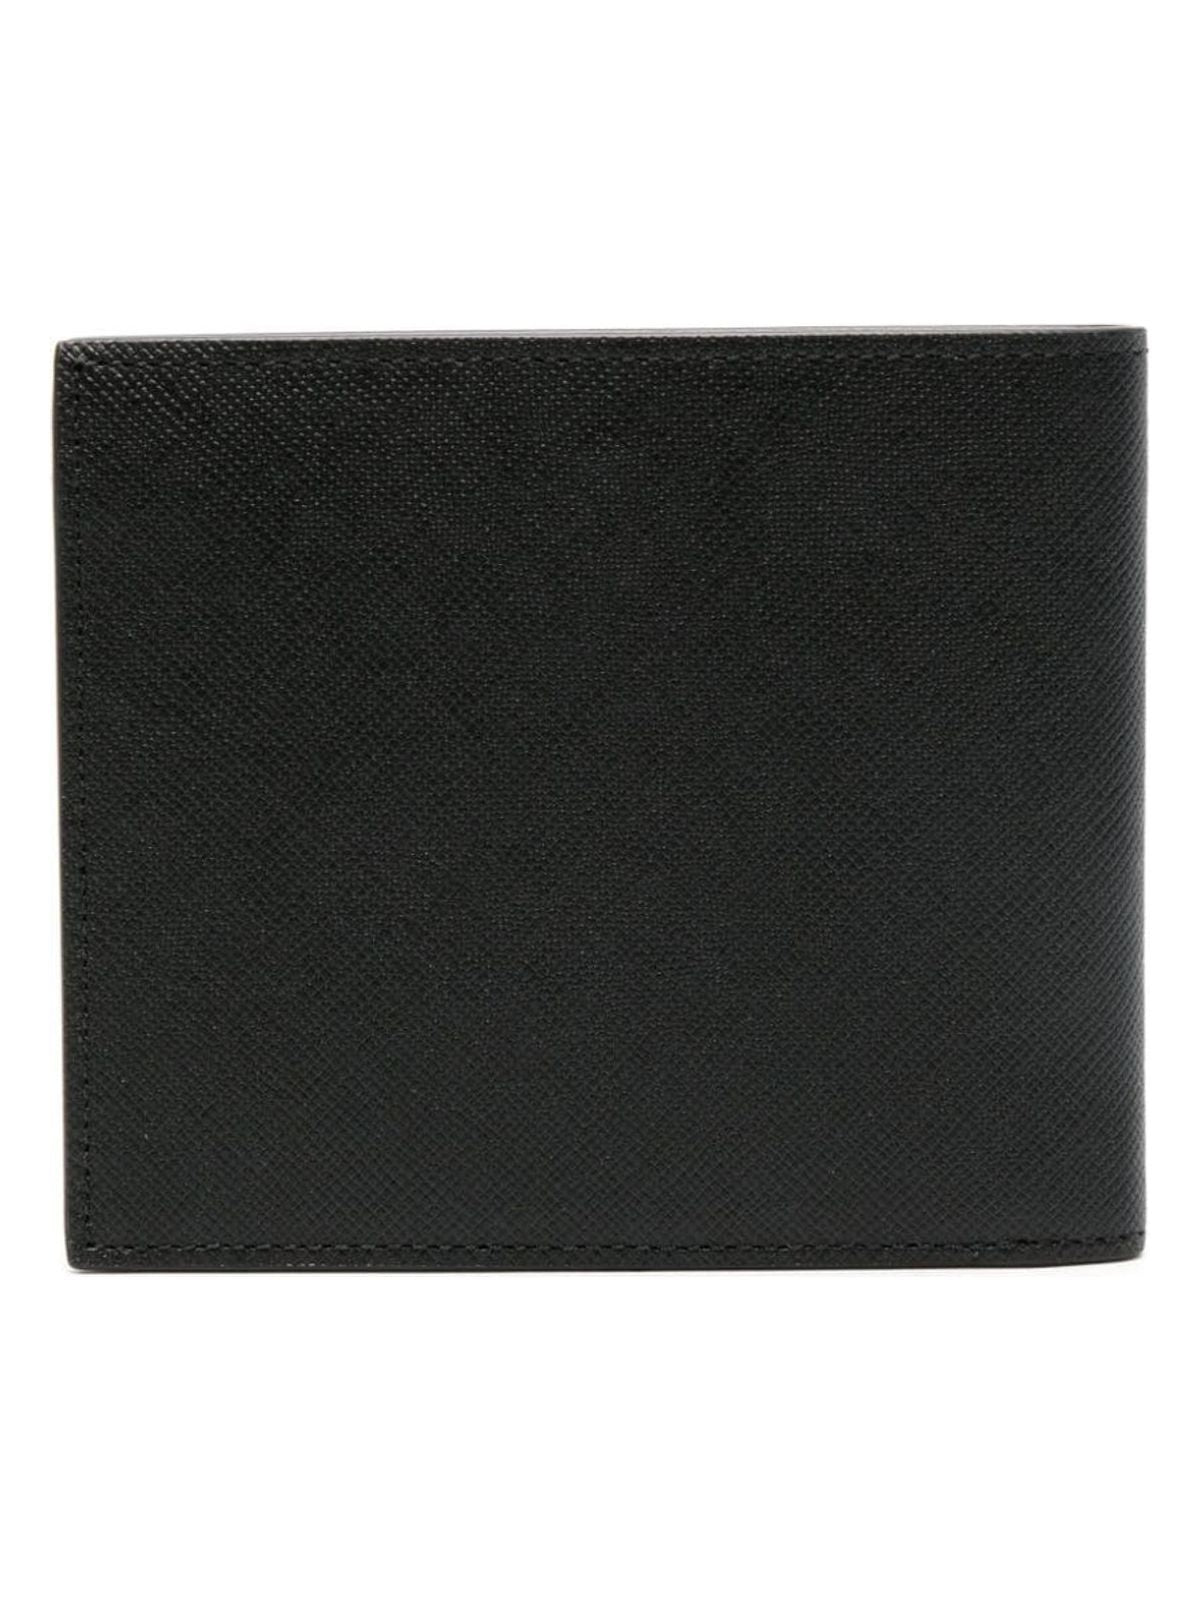 MMIBLR79 PAUL SMITH LOGO LEATHER WALLET